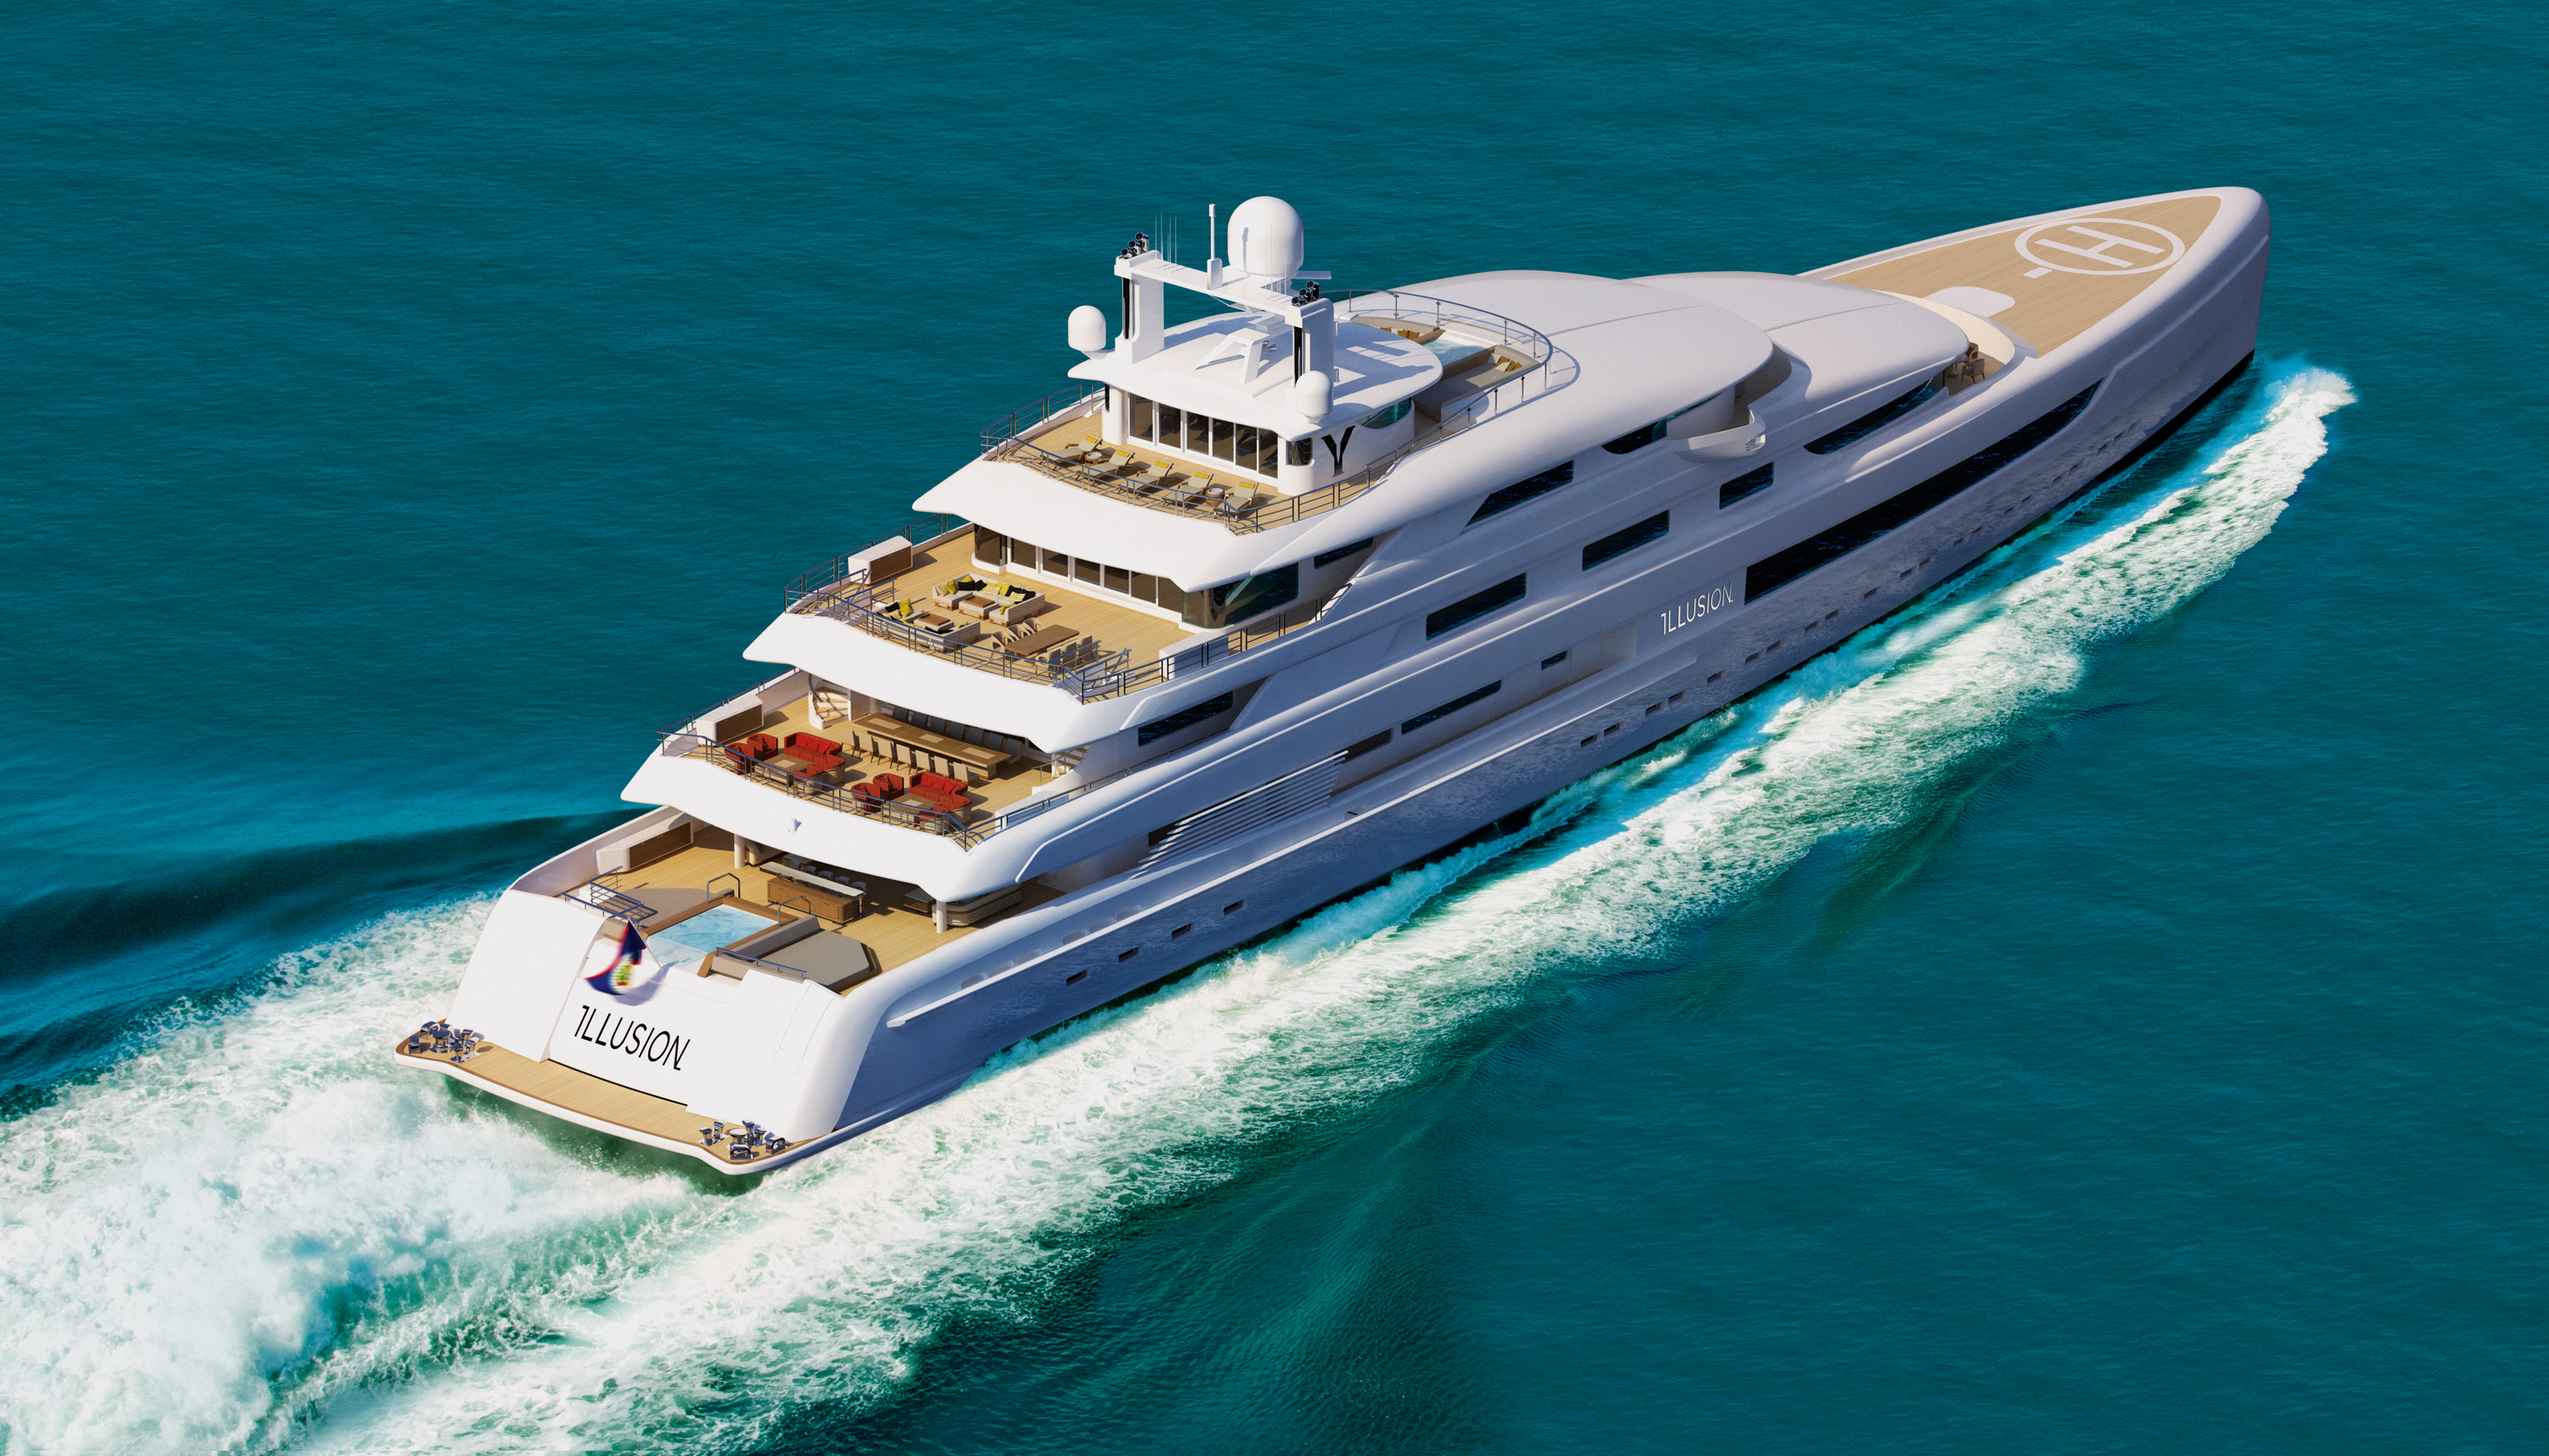 superyachts over 100m